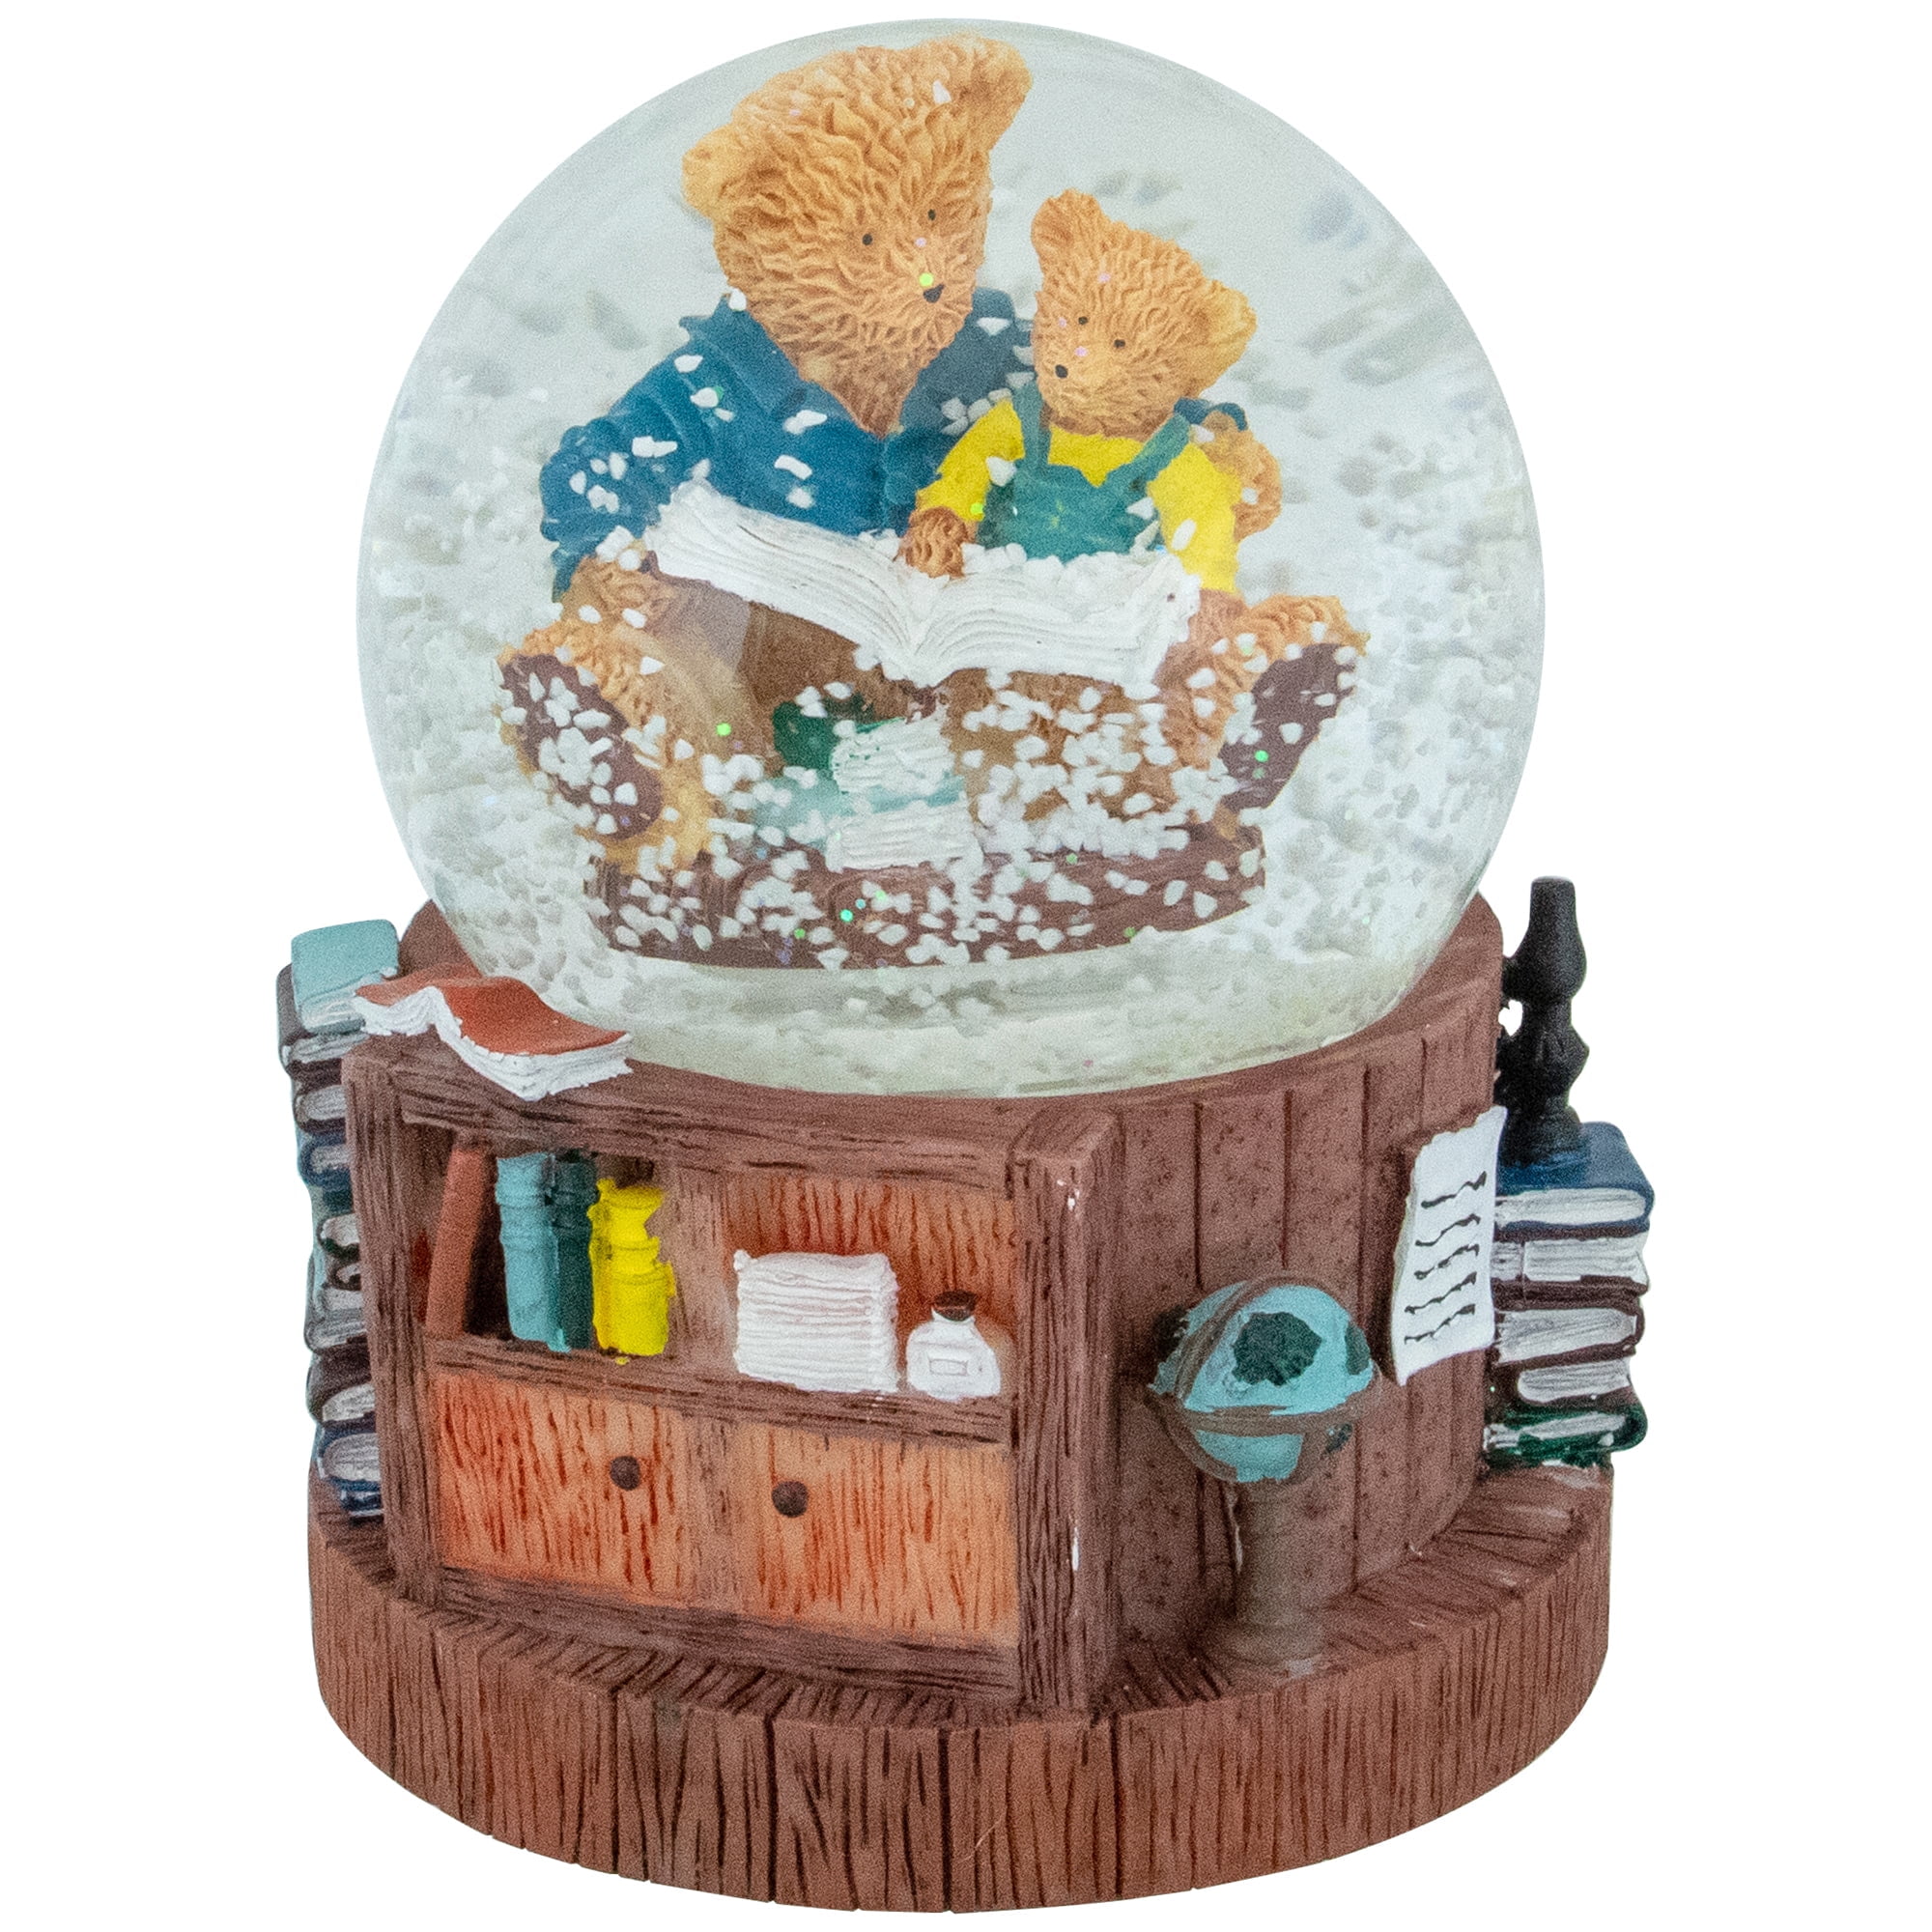 Water Globe and Snow Globe Assembly Guide - National Artcraft